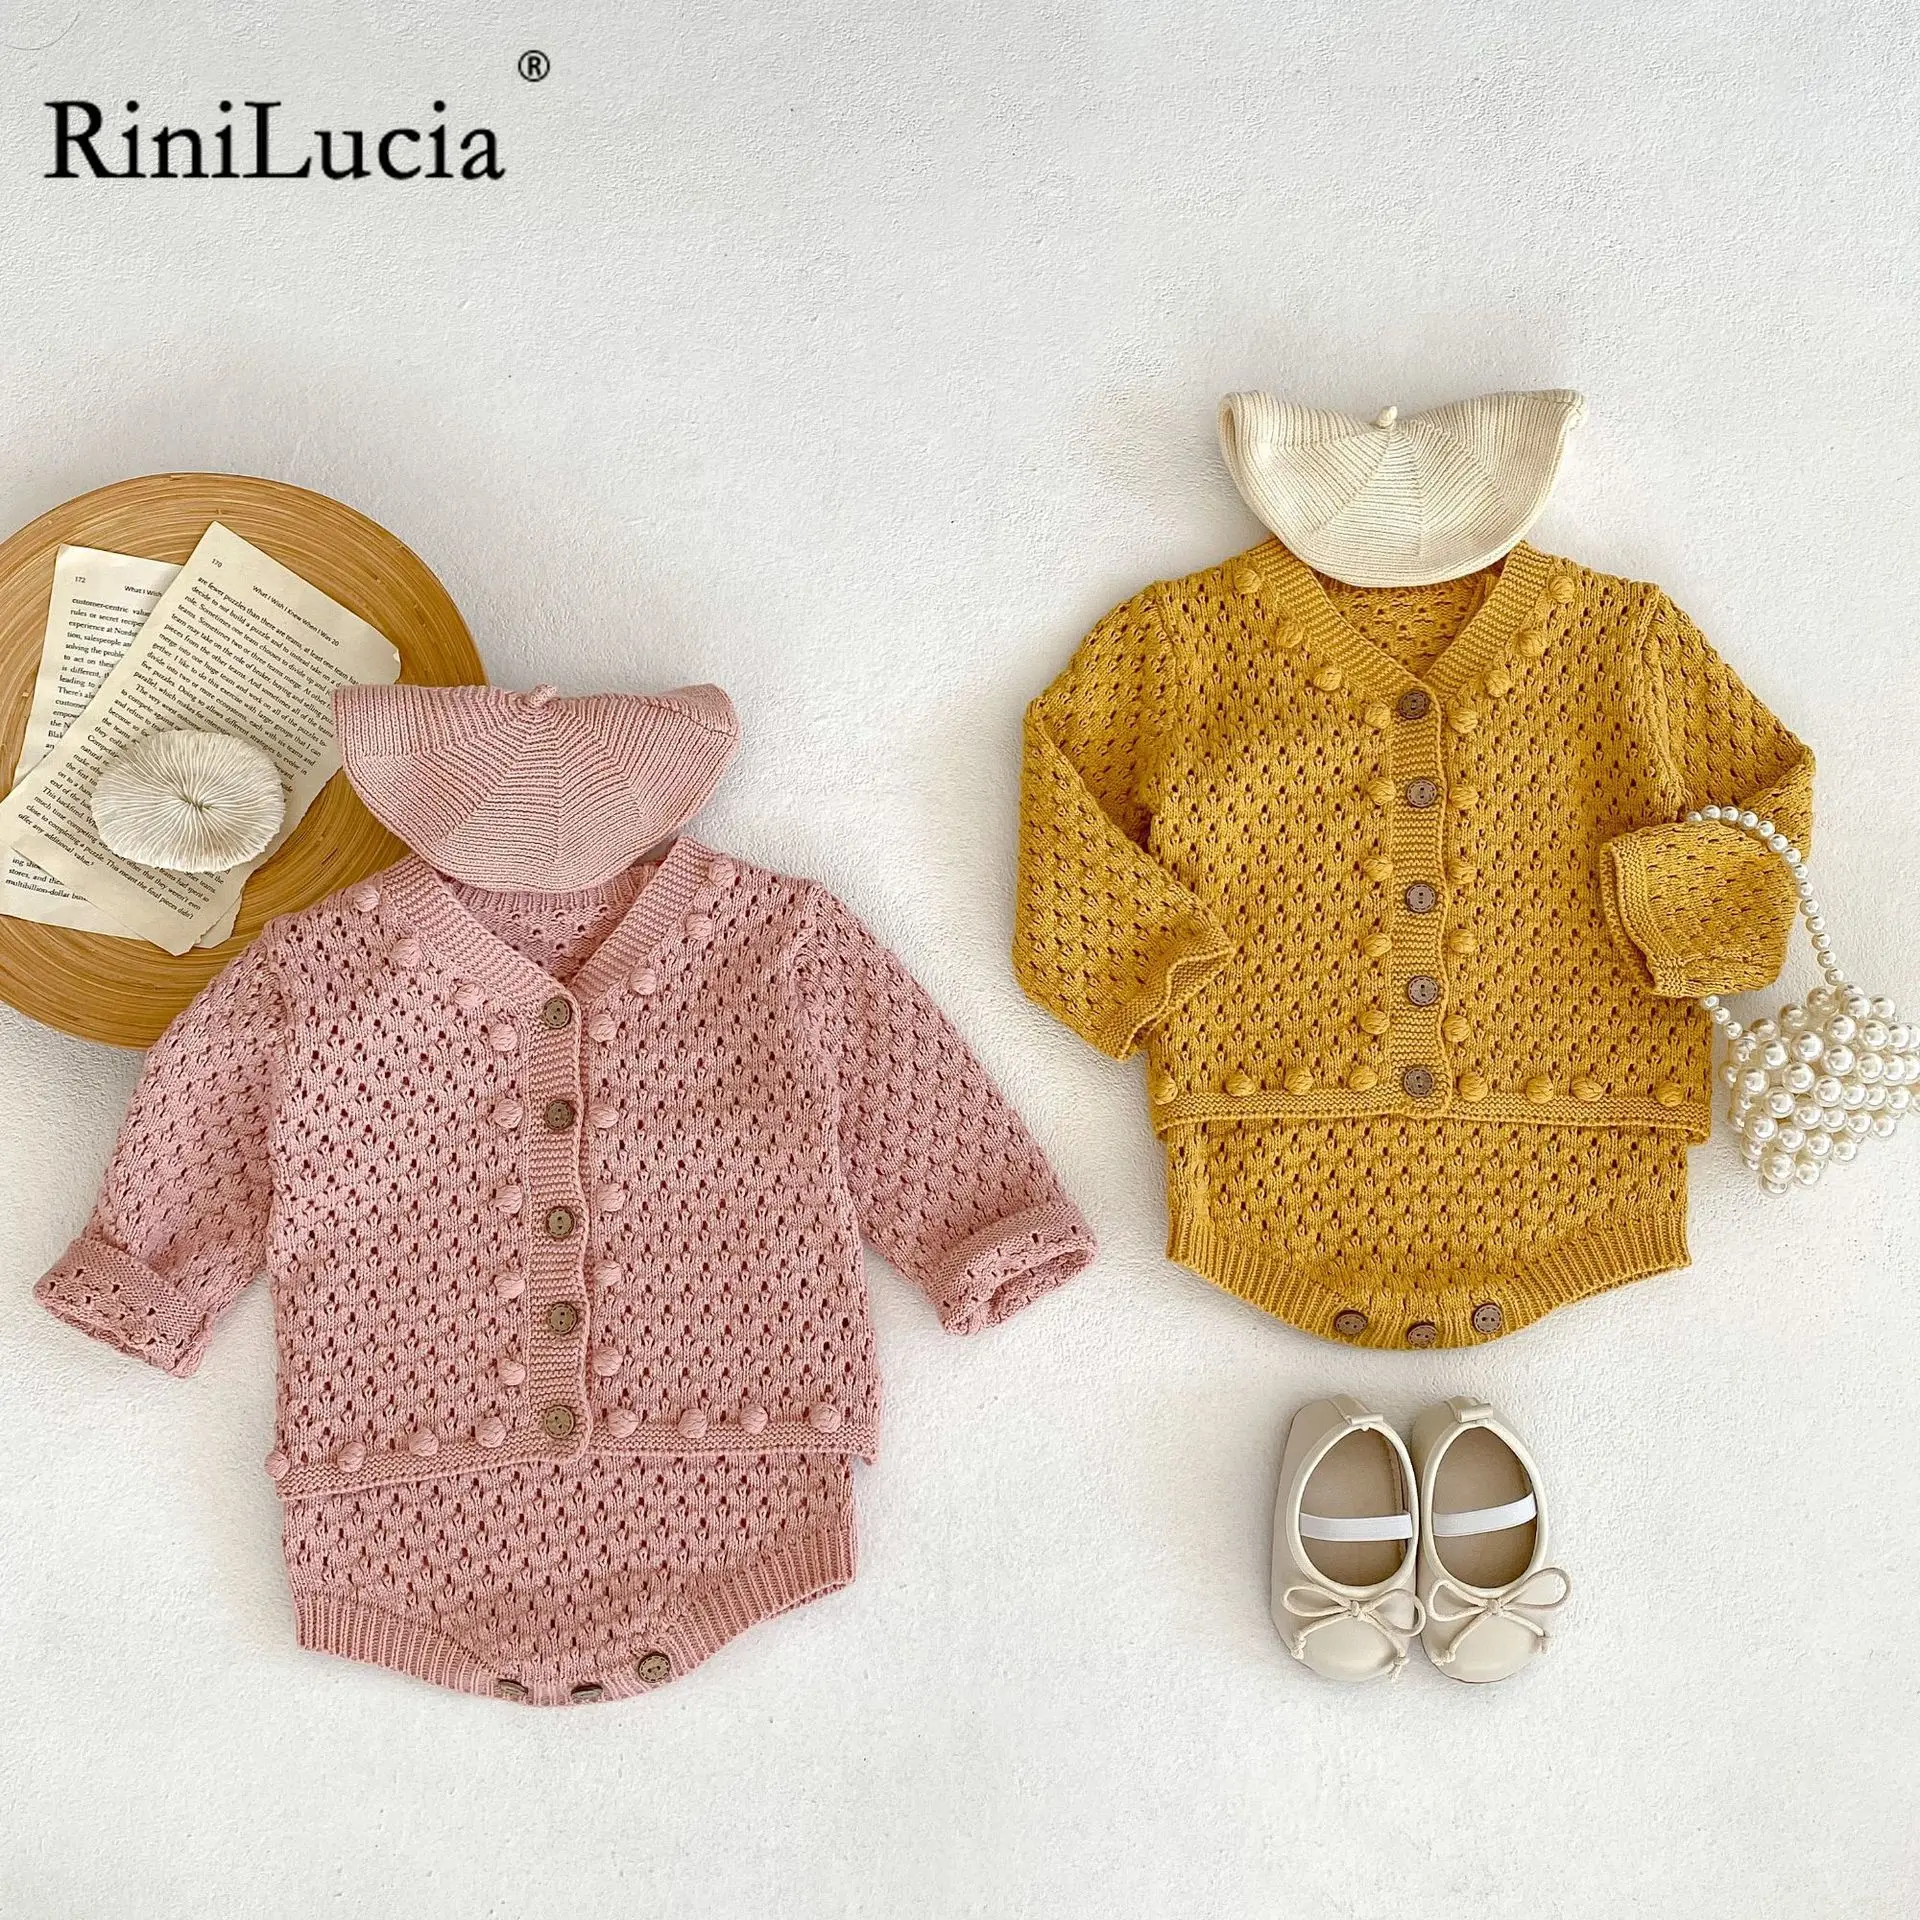 

RiniLucia 0-24M Toddler Infant Baby Clothes Sets Solid Knit Coat Sleeveless Romper 2pcs Outifts Autumn Newborn Baby Clothing Set